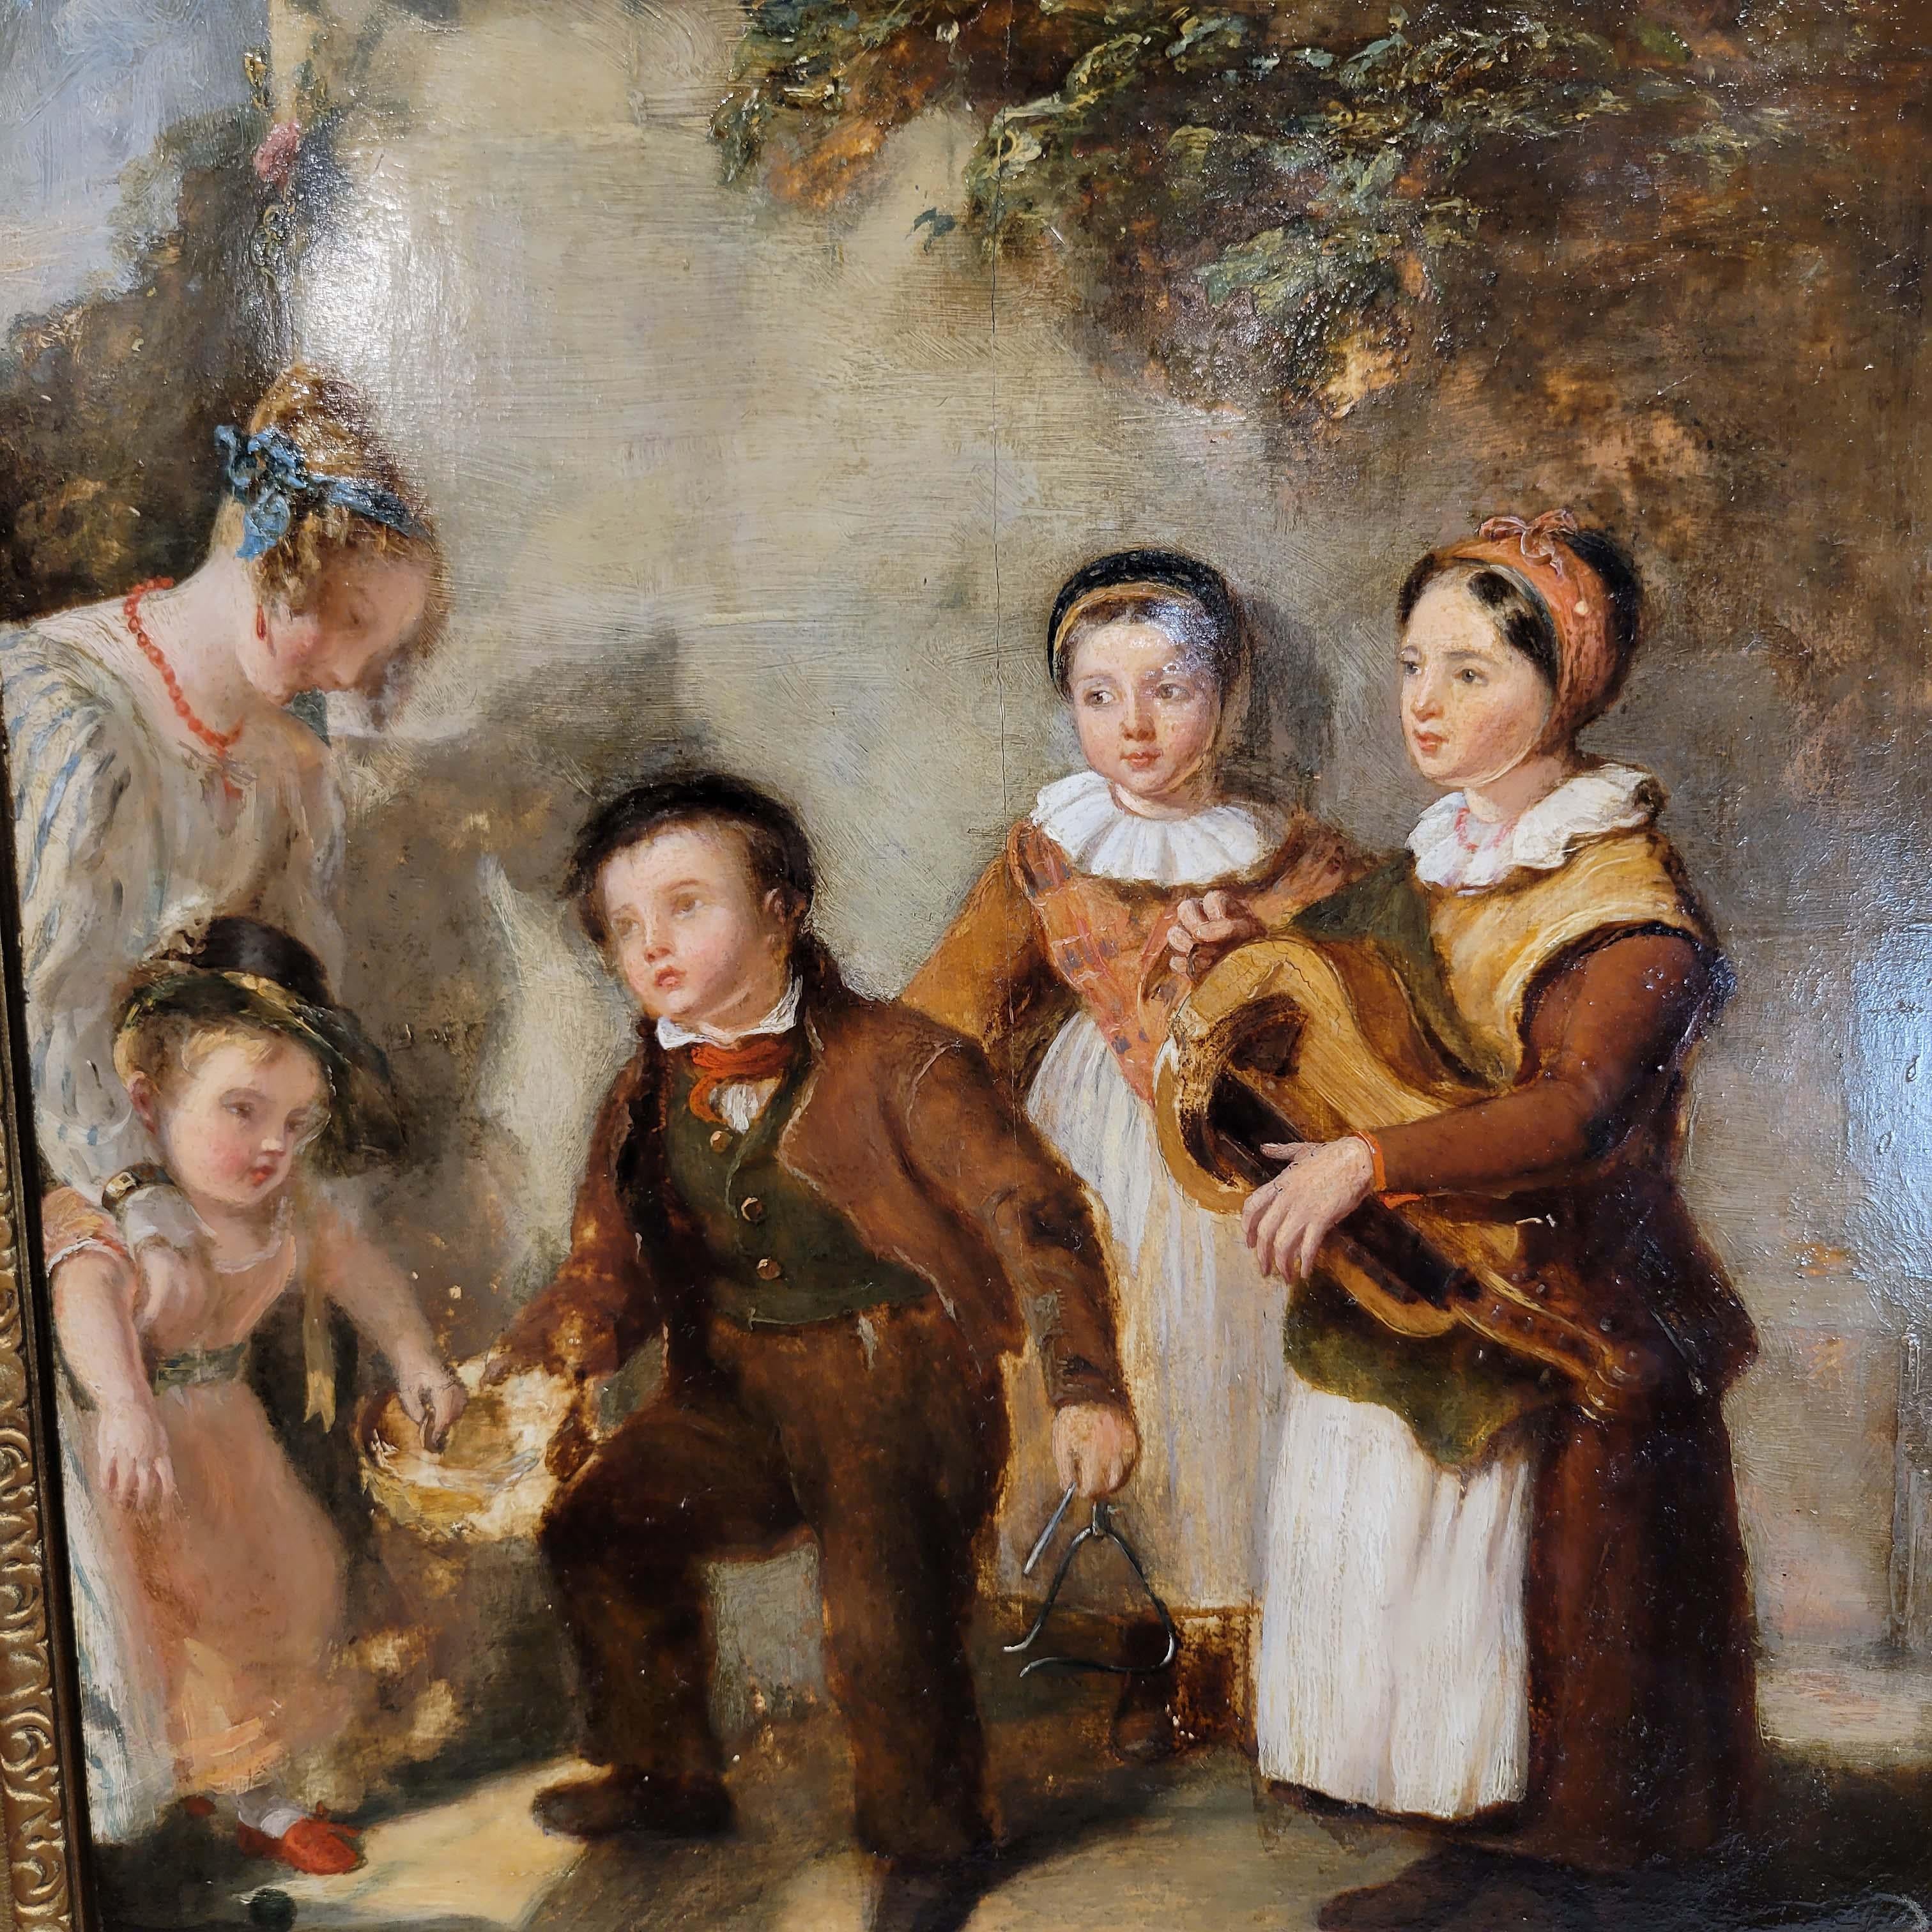 A charming painting on board depicting a genre scene of two sisters and their brother as performers and a young girl along with her mother putting money in their basket. Signed on lower right Robert Edmonstone and dated 1828 or 1827, It is kinda